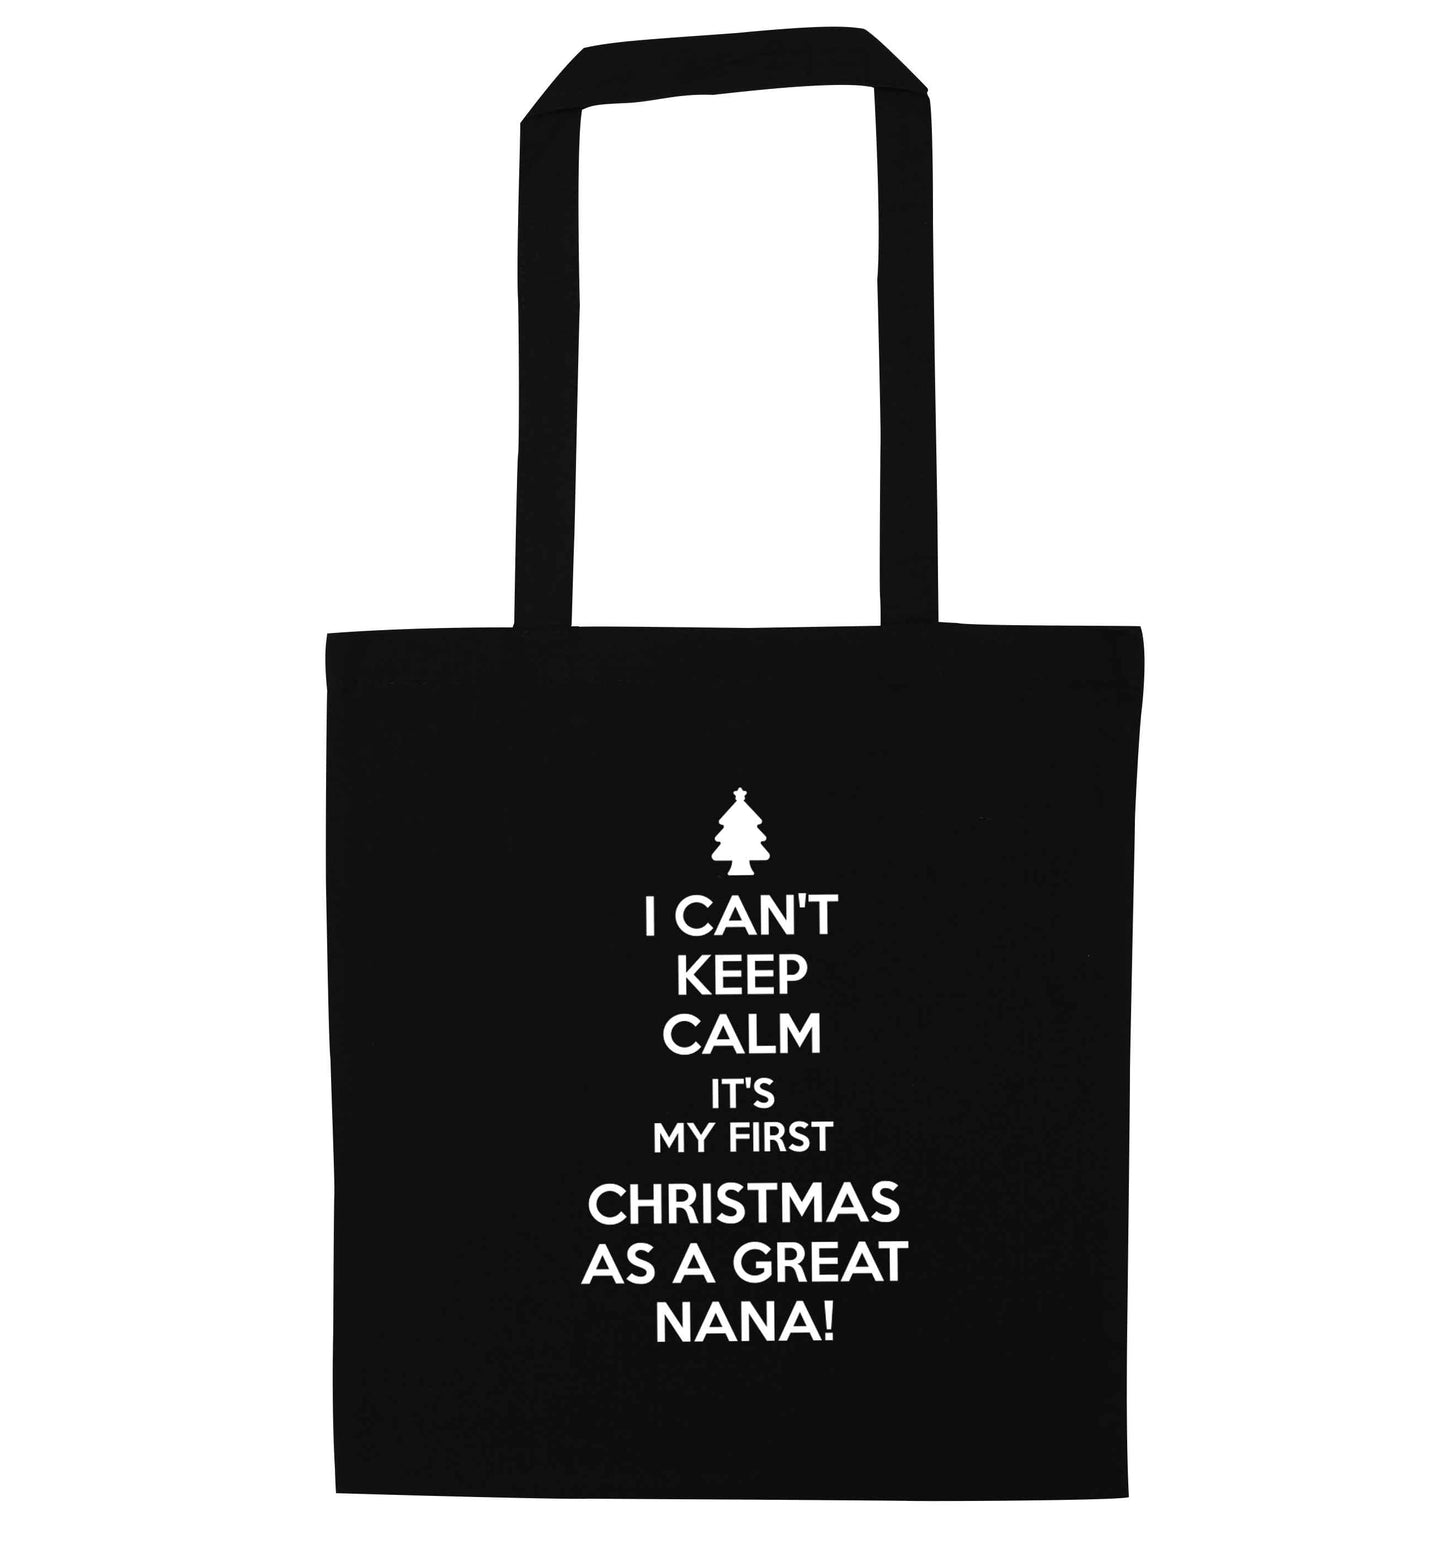 I can't keep calm it's my first Christmas as a great nana! black tote bag